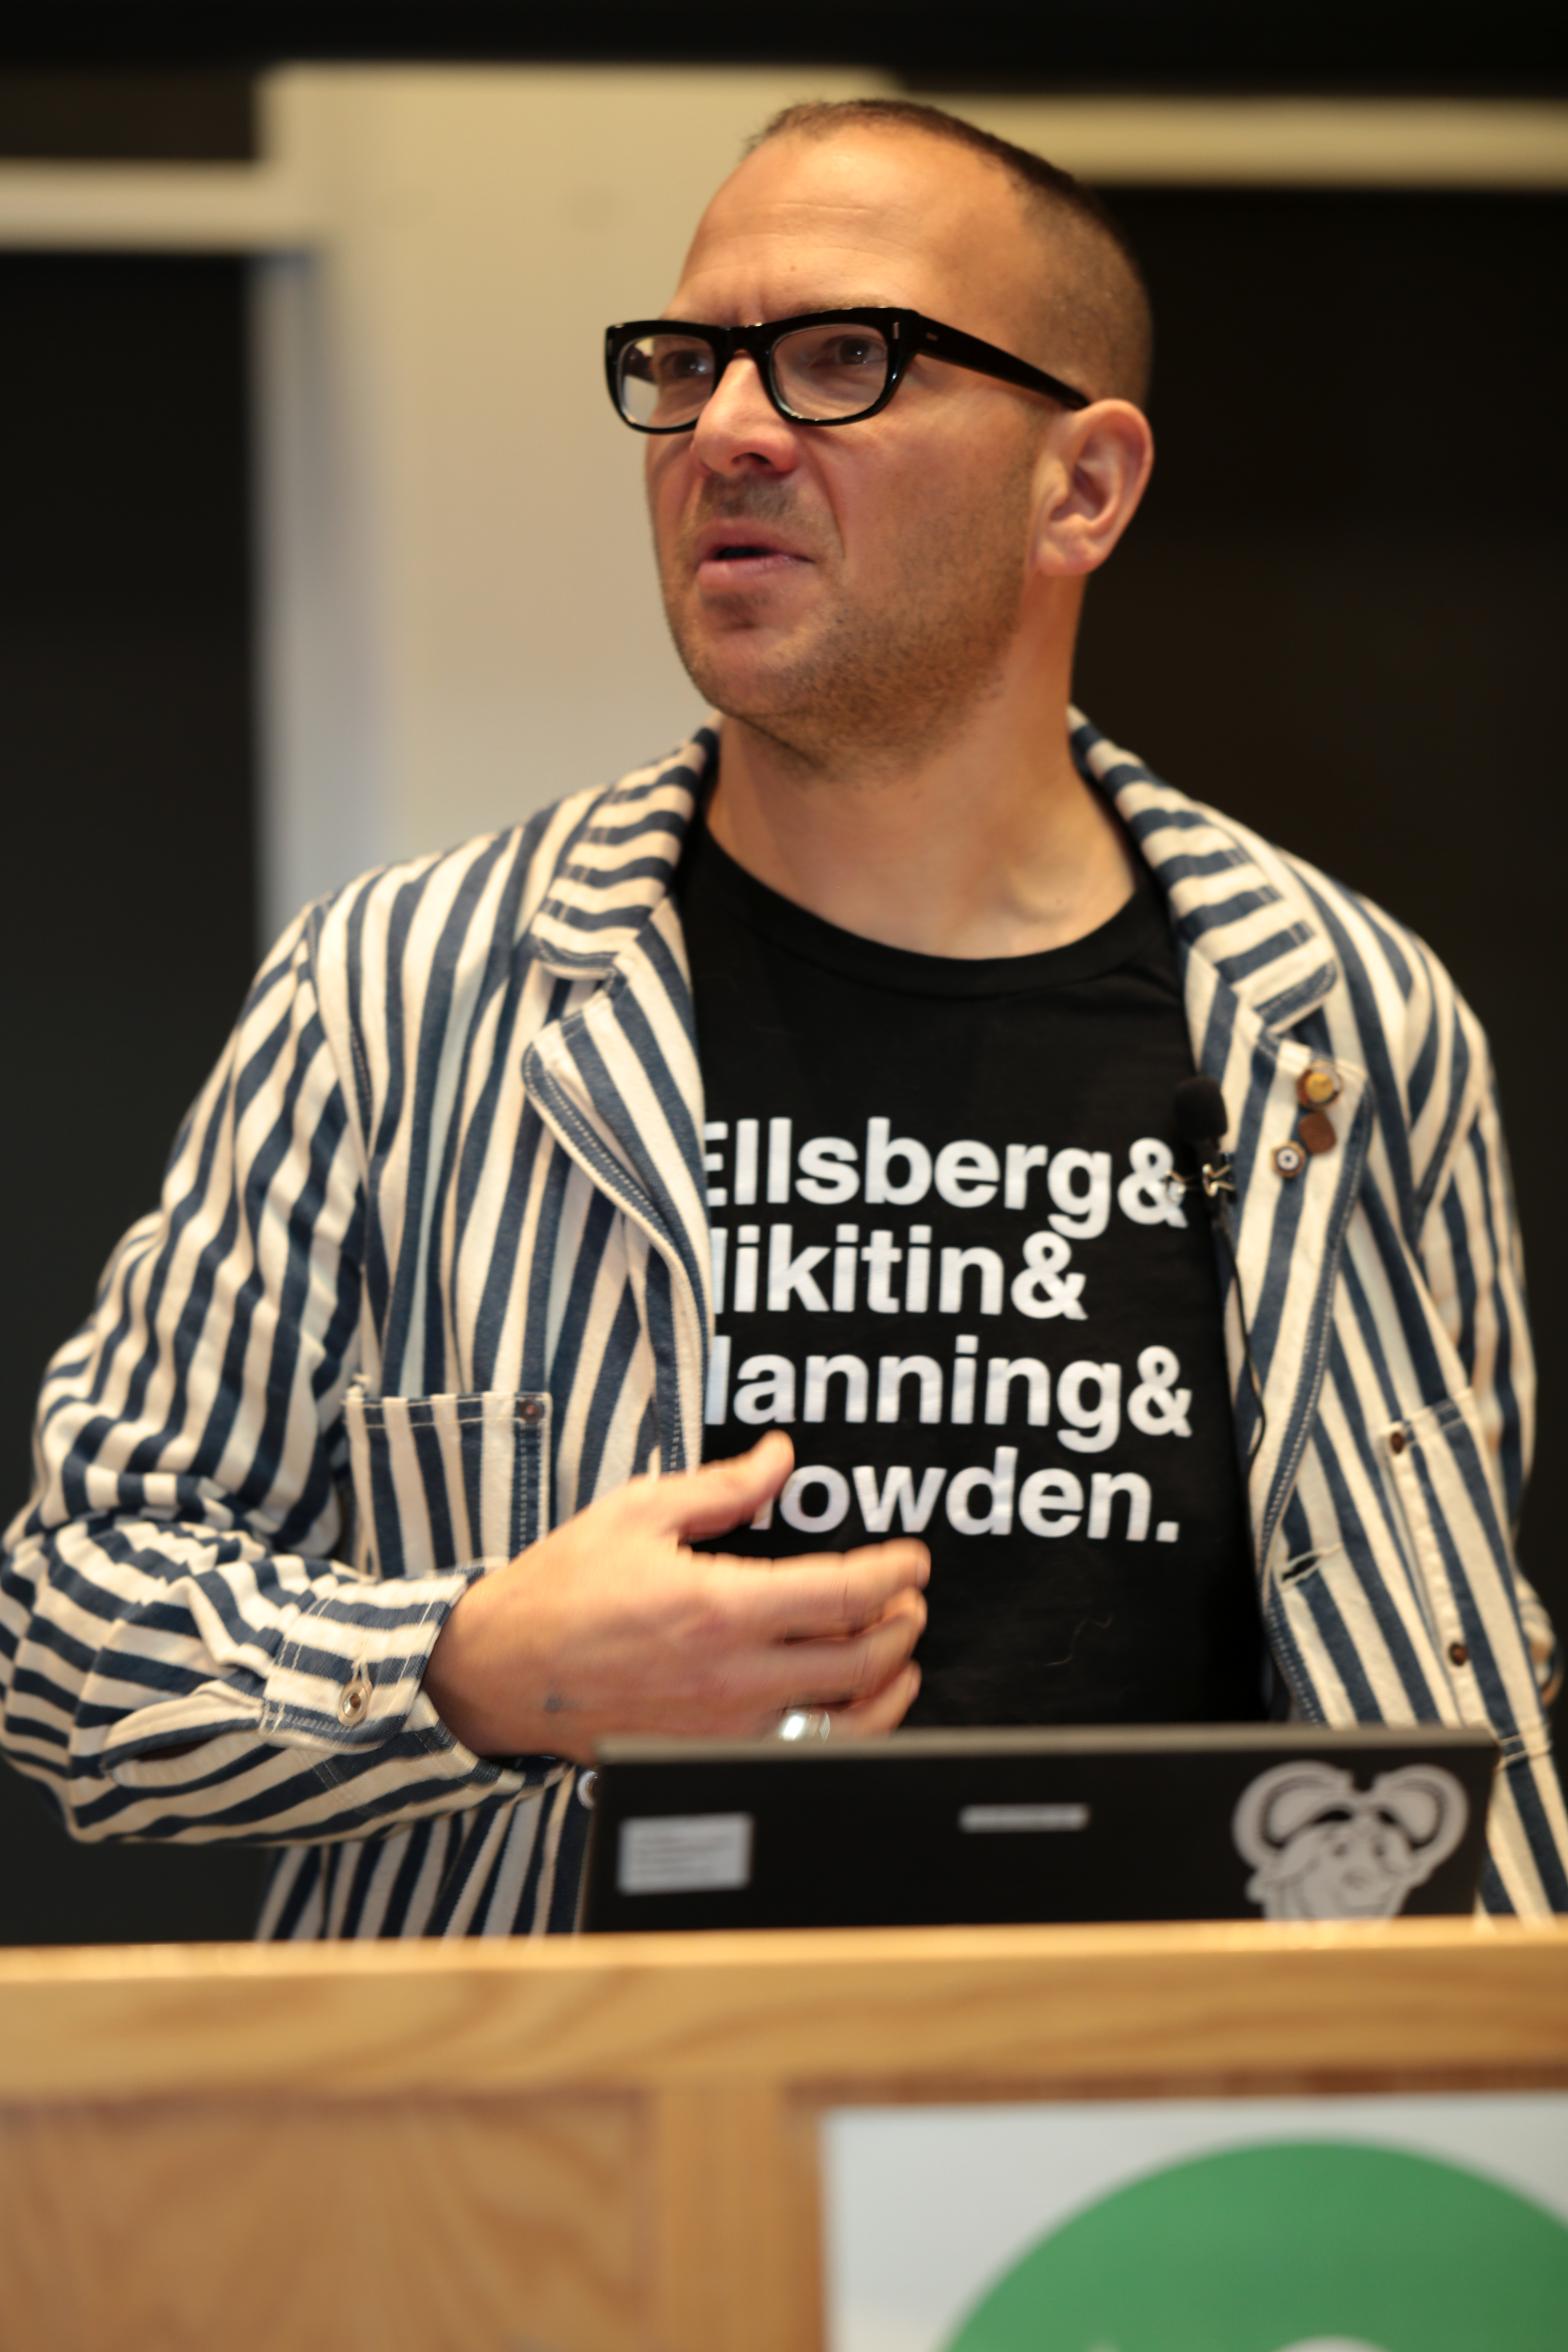 Cory Doctorow stands at a podium in front of a lecture hall. He is wearing a white and navy striped blazer and a black shirt with the text 'Ellsberg & Nikitin & Manning & Snowden.' He has short, dark hair and large, dark glasses.